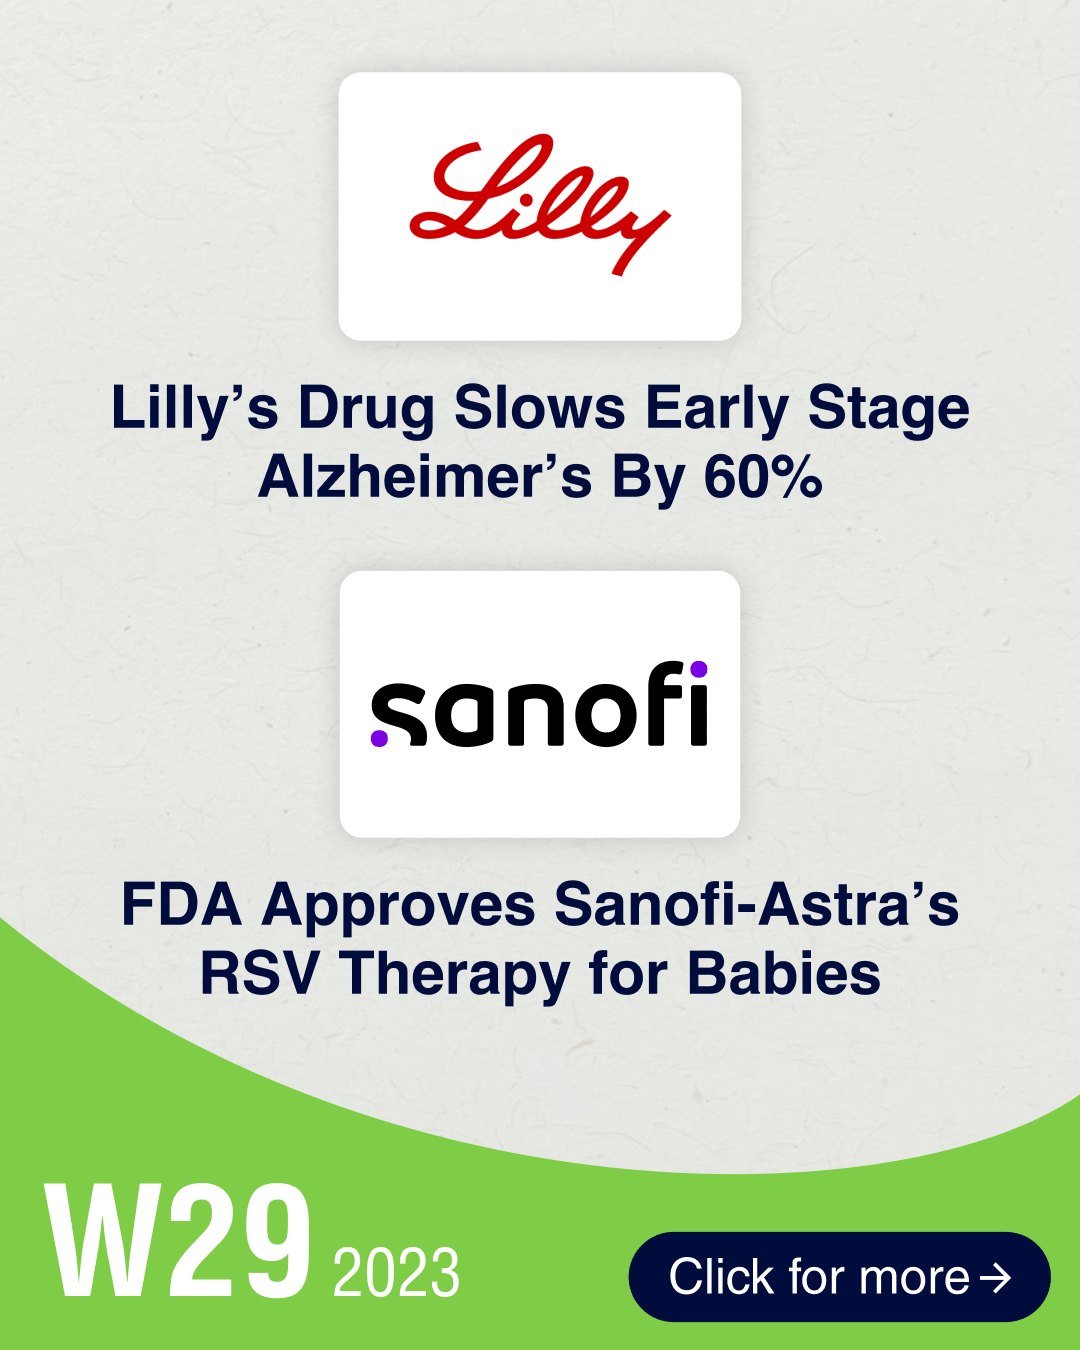 Lilly’s donanemab slows early Alzheimer’s by 60%; FDA okays Sanofi-Astra’s RSV therapy for babies